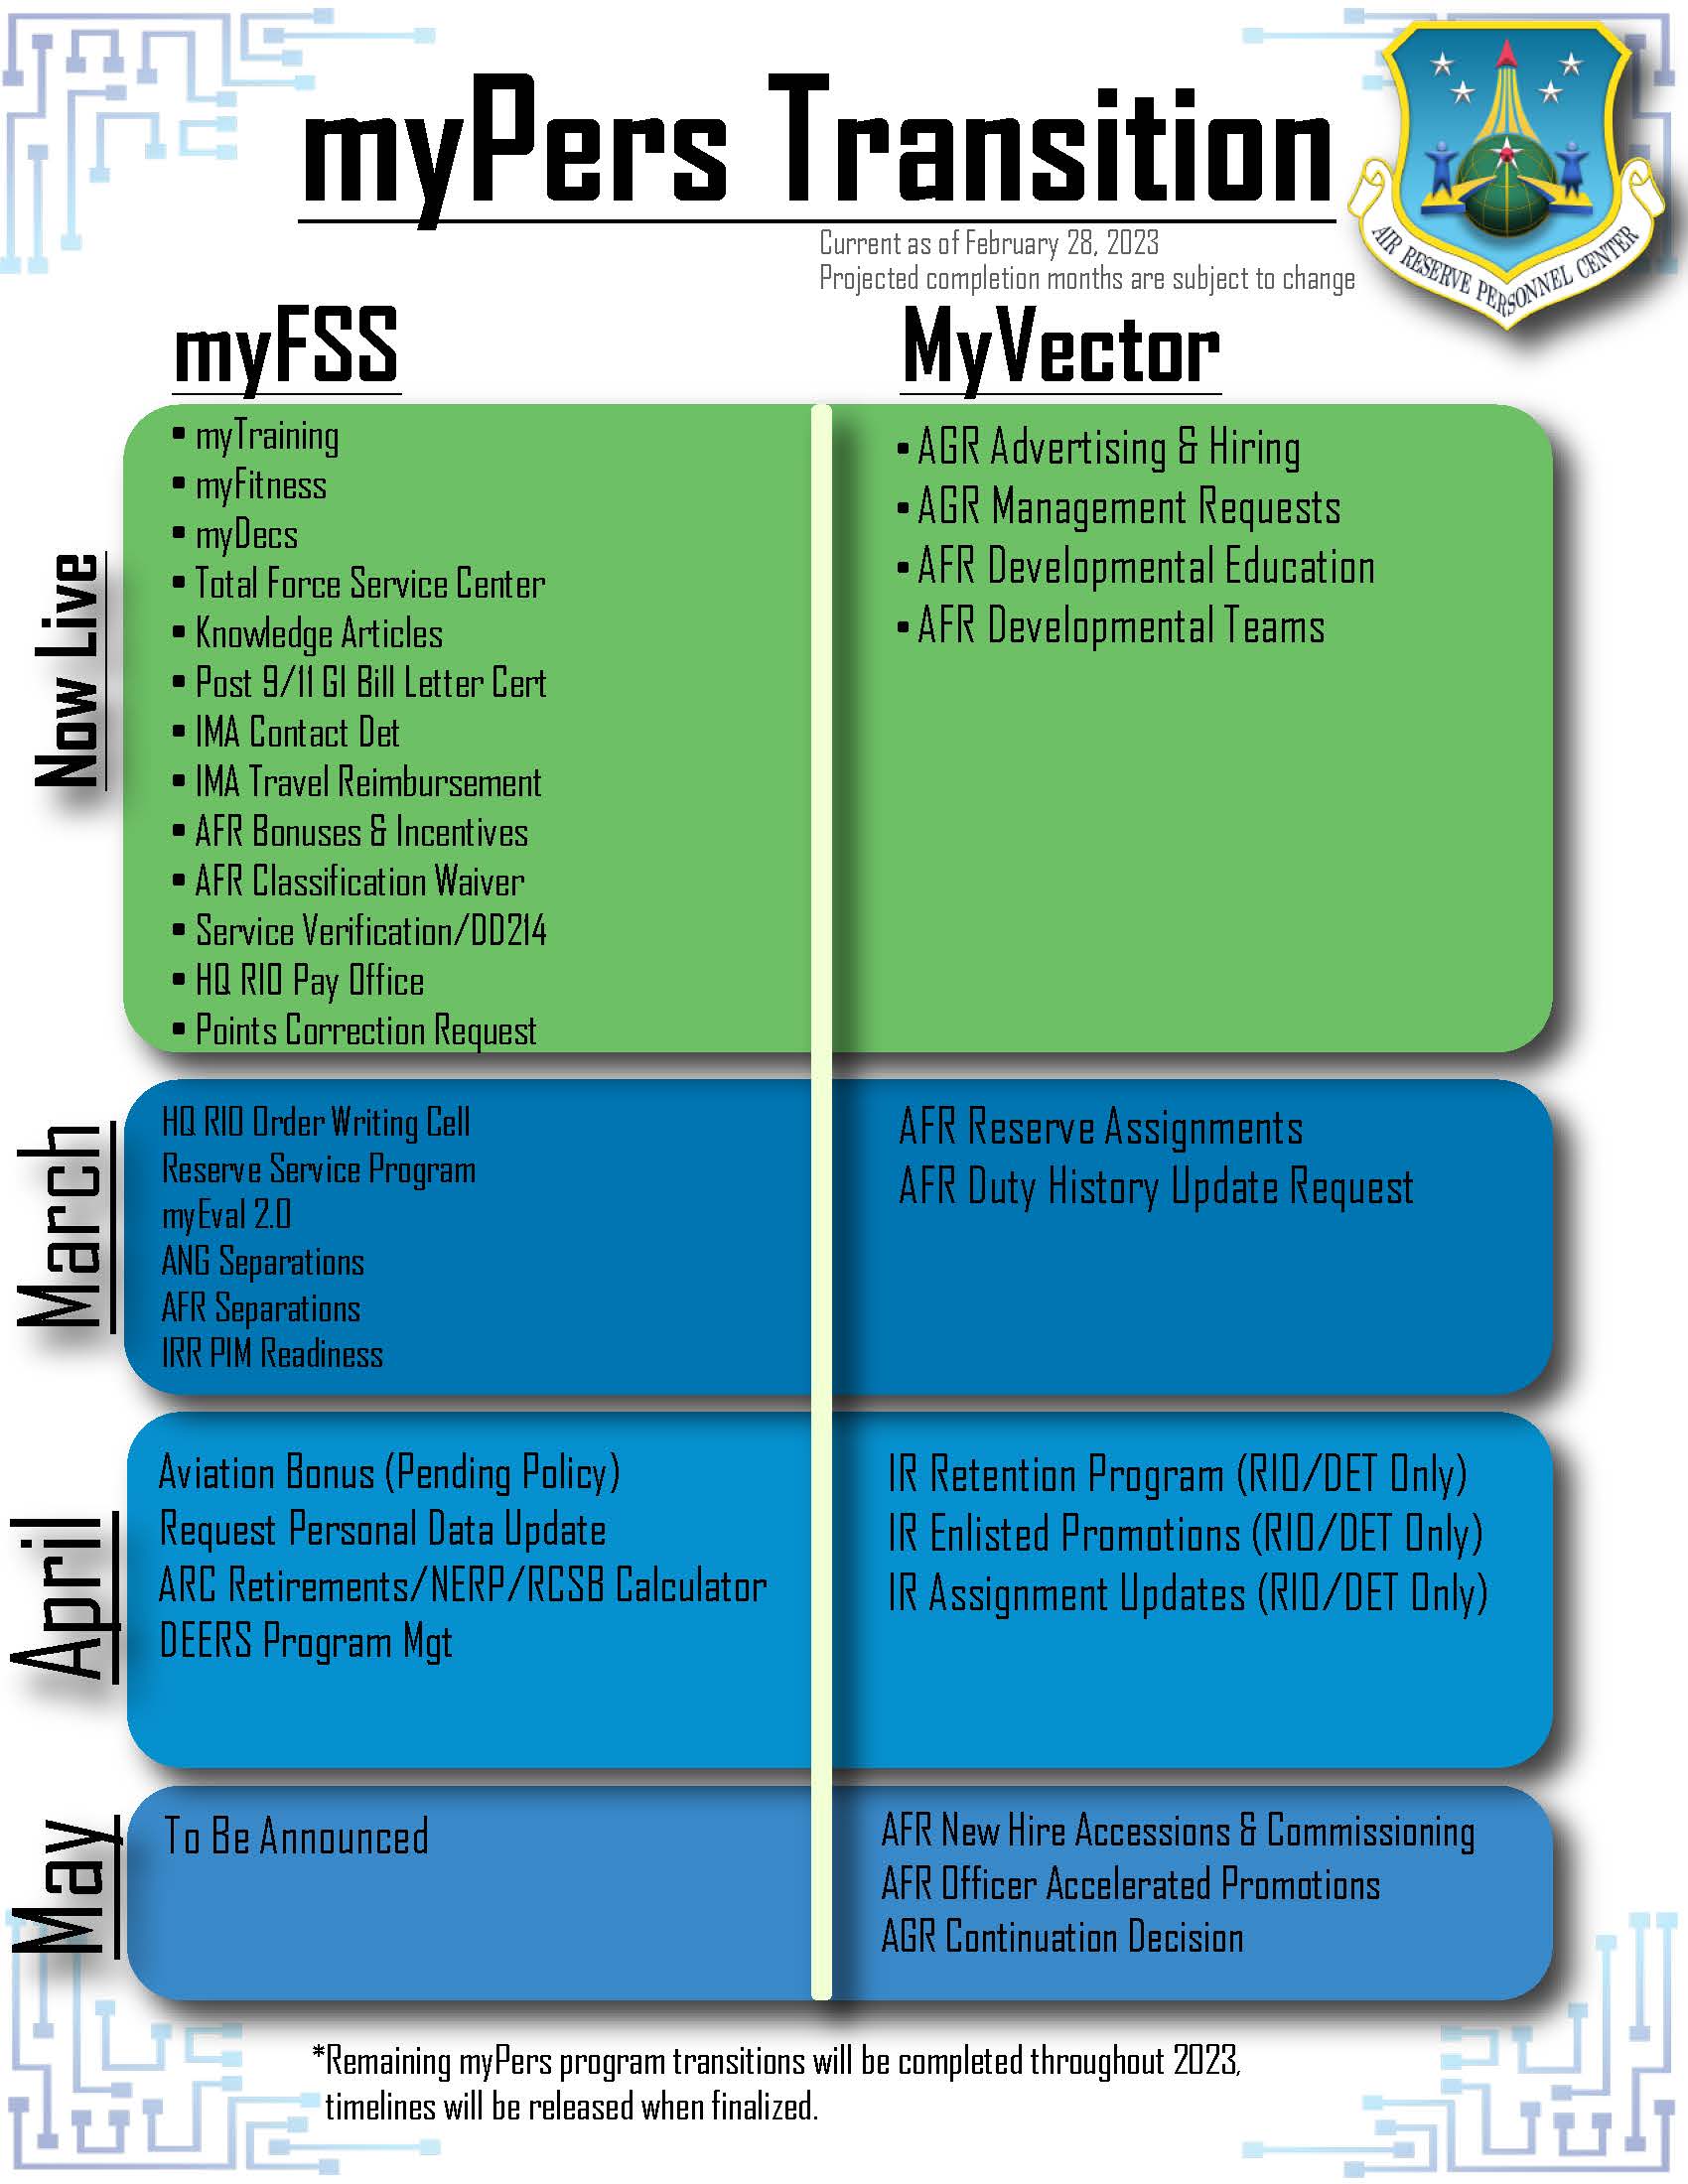 myPers Transition infographic